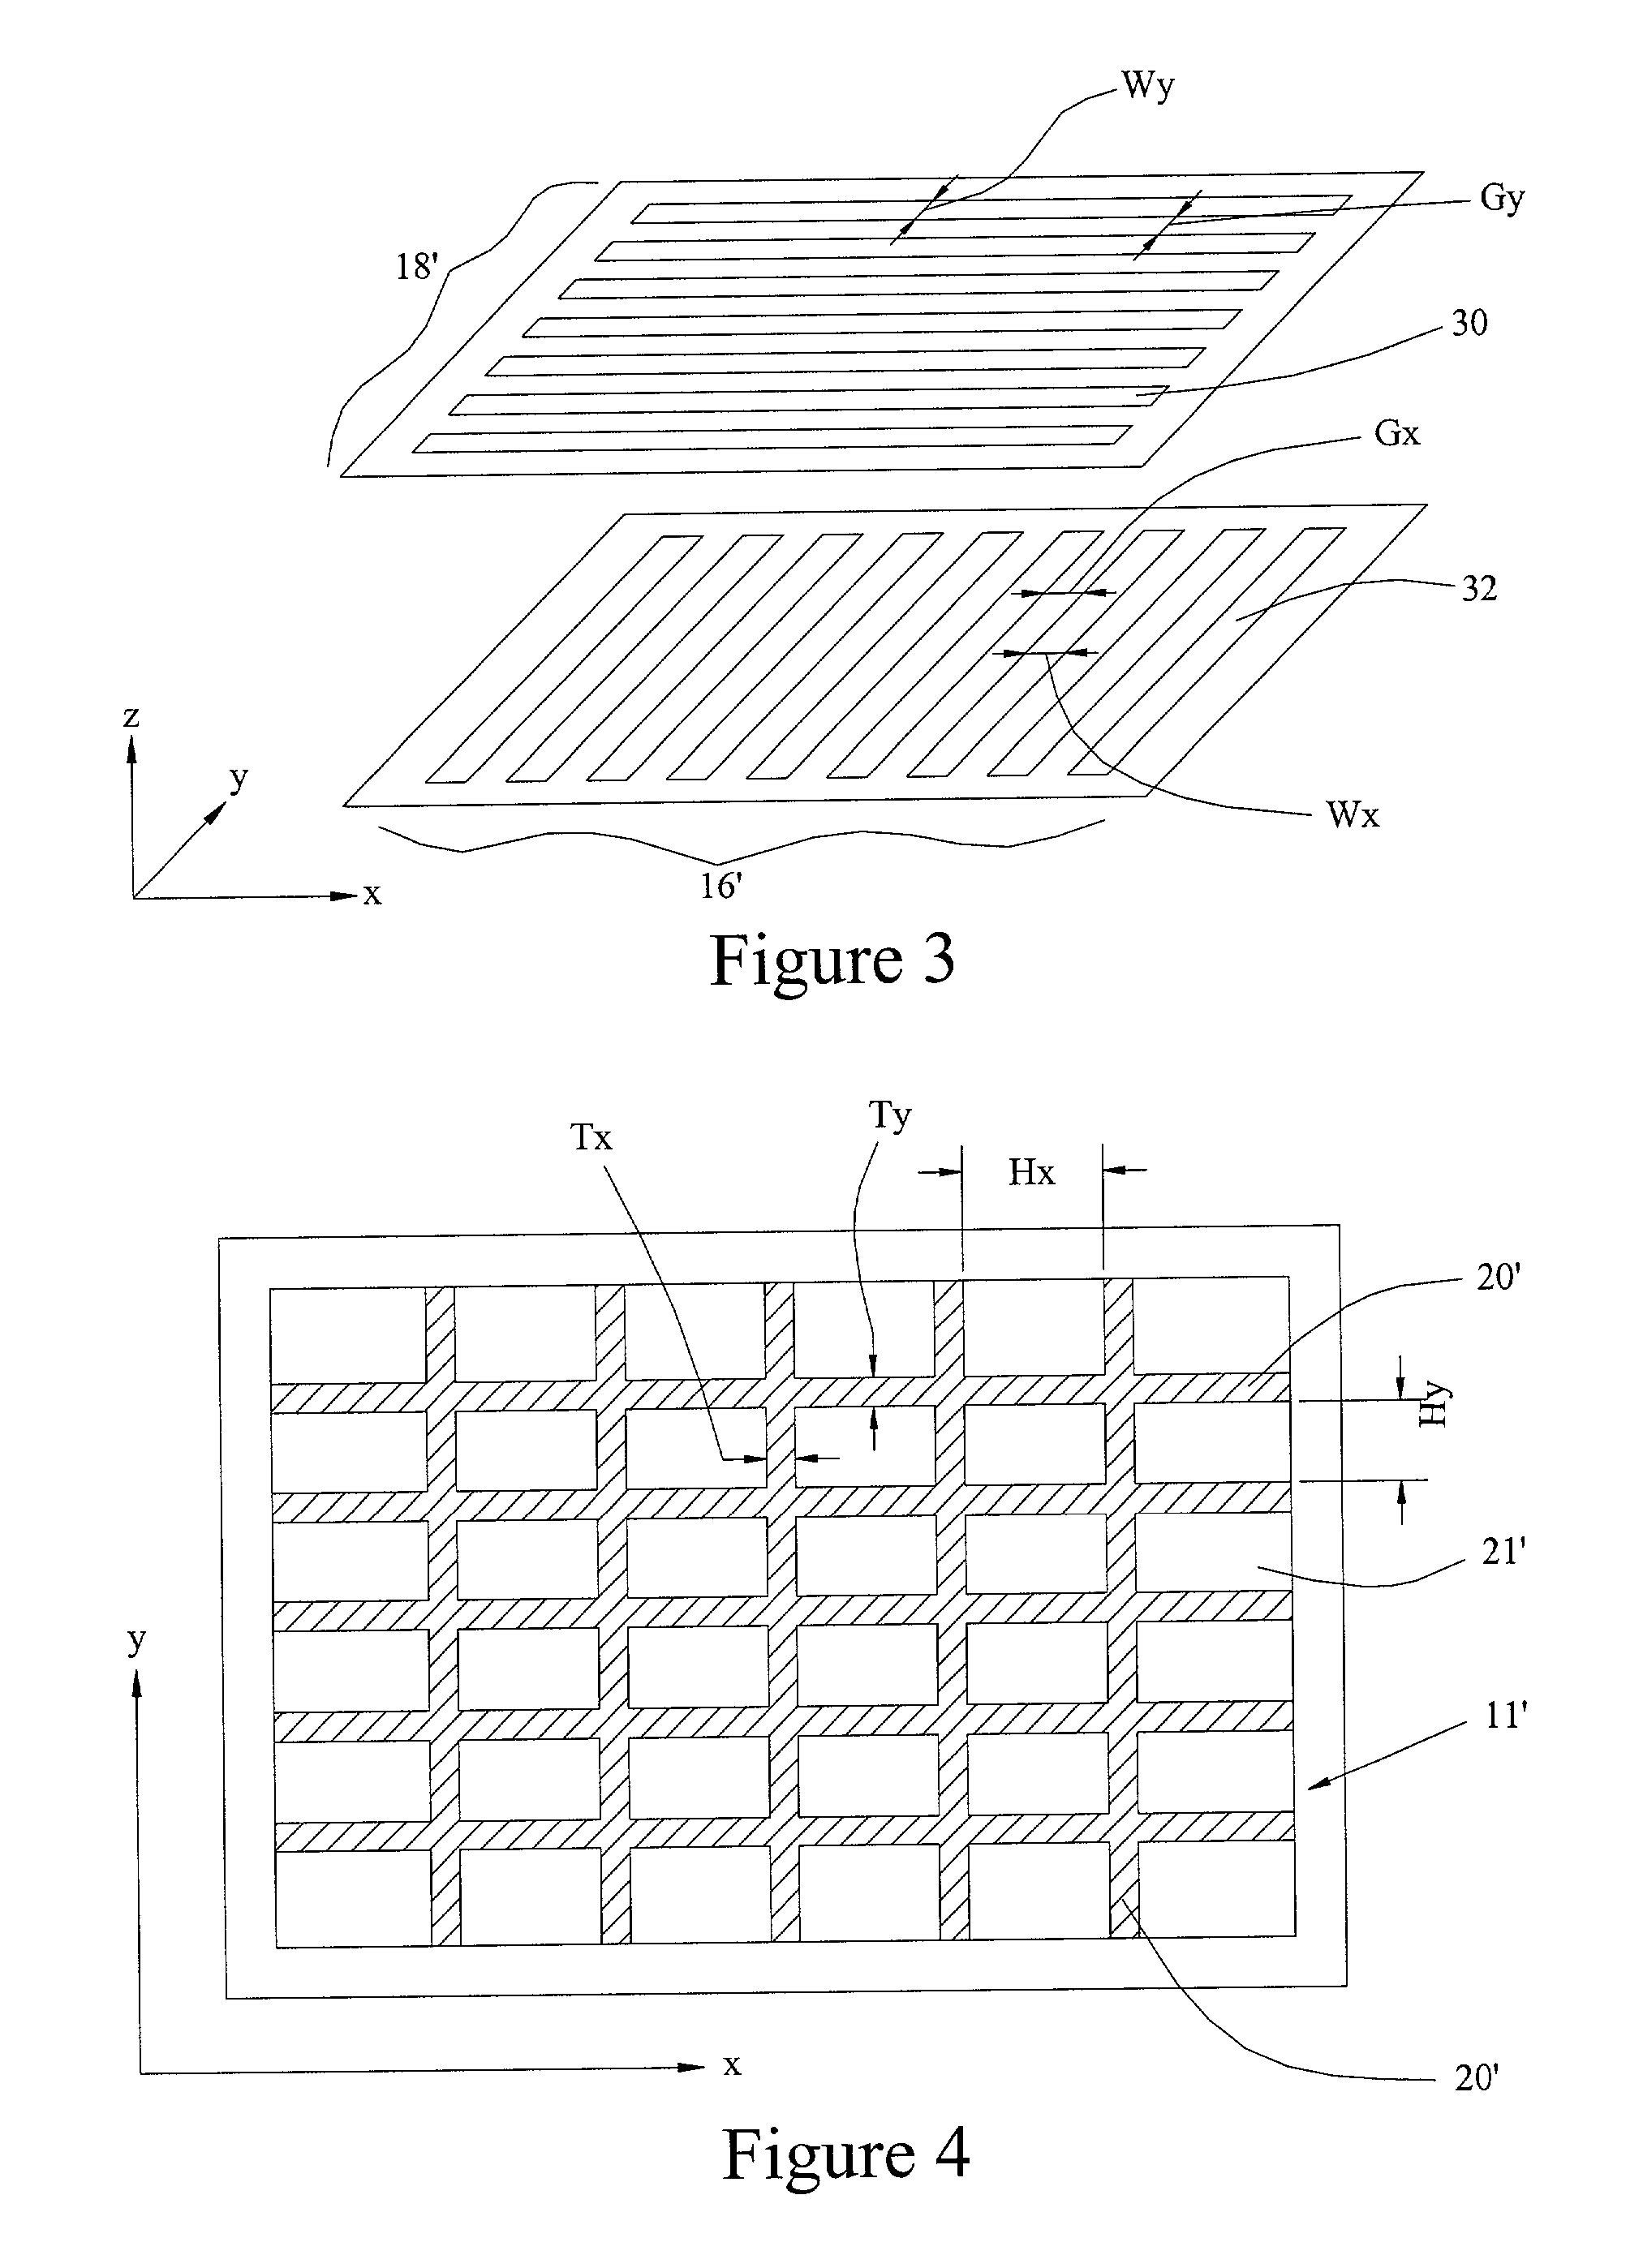 Cholesteric liquid crystal device for writing, inputting, and displaying information